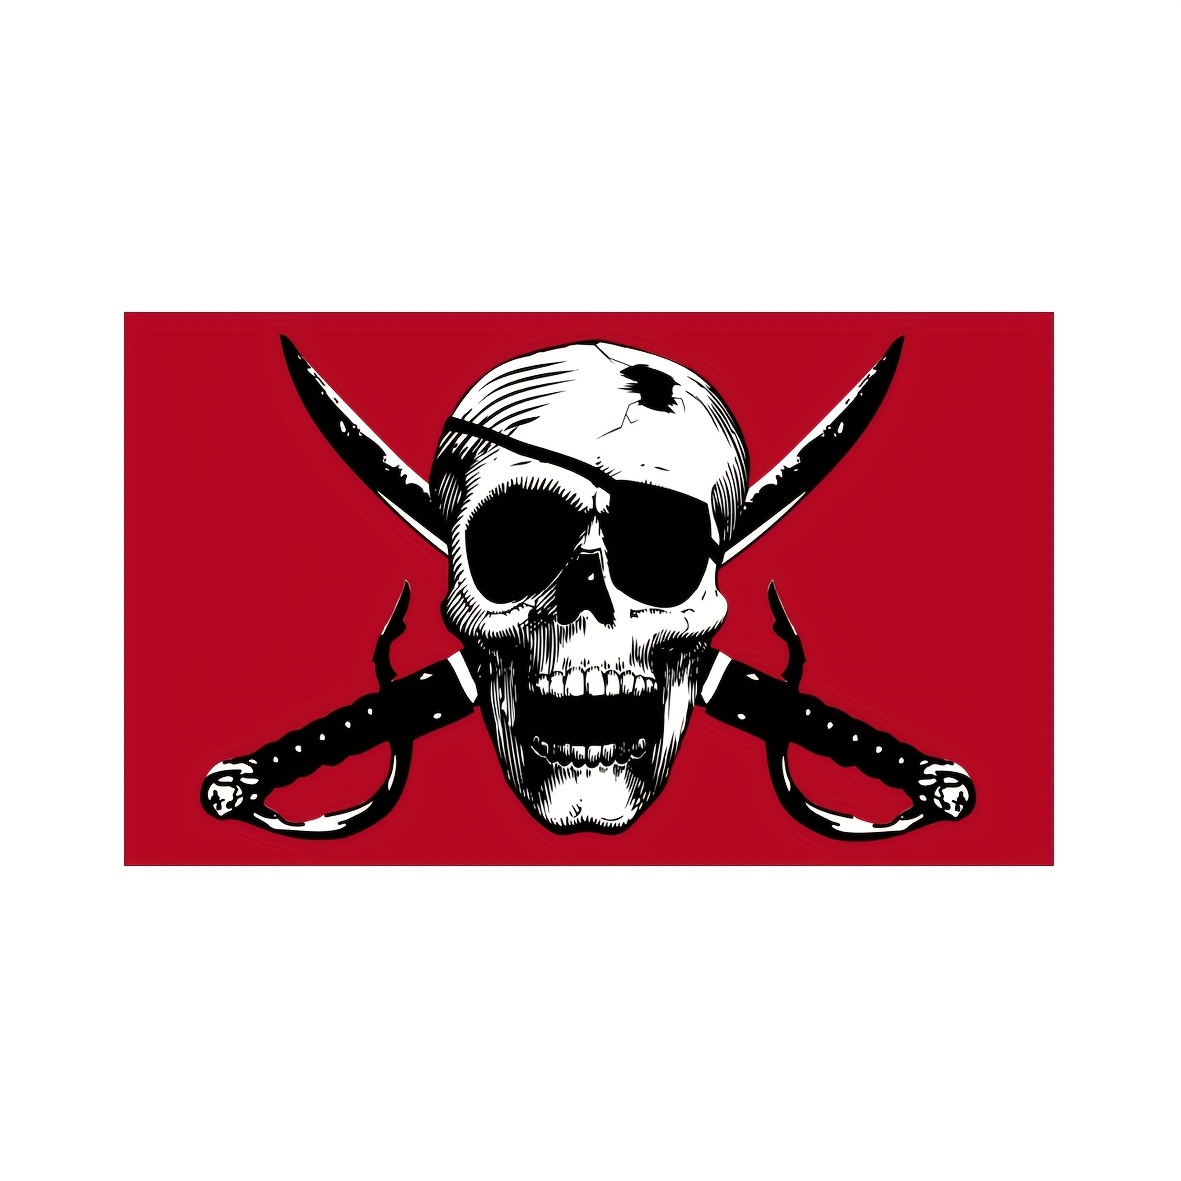 

1pc Crimson Pirate Flag 3x5ft (90x150cm), Made Of 100d Thick Polyester Fabric With A Thick Textured The Flag Has 2 Copper Buckles And Can Be Reused It Can Be Hung Outdoors